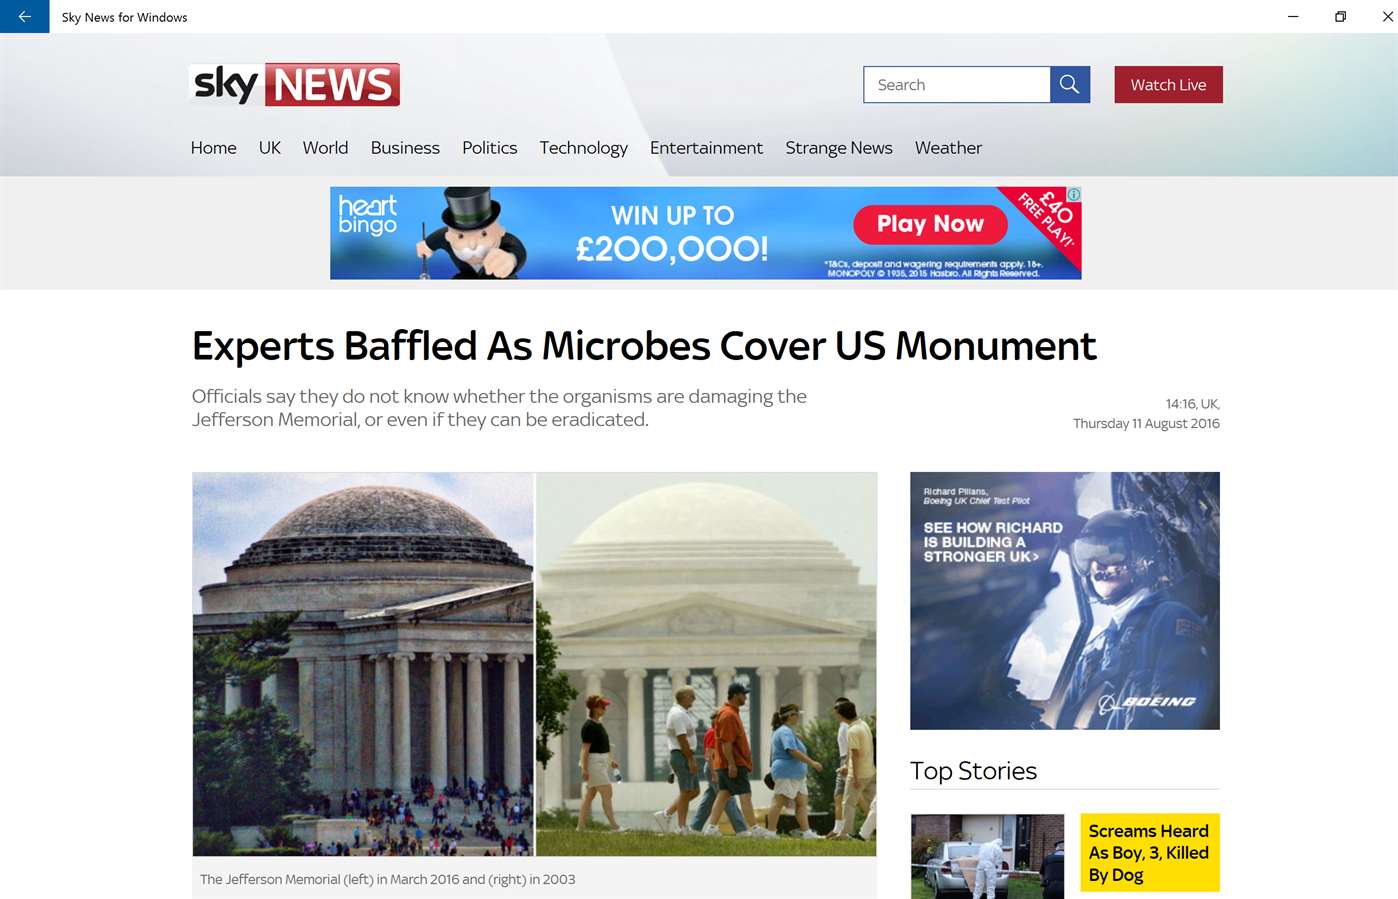 Sky News releases its new app for Windows 10, but it’s a web-wrapper